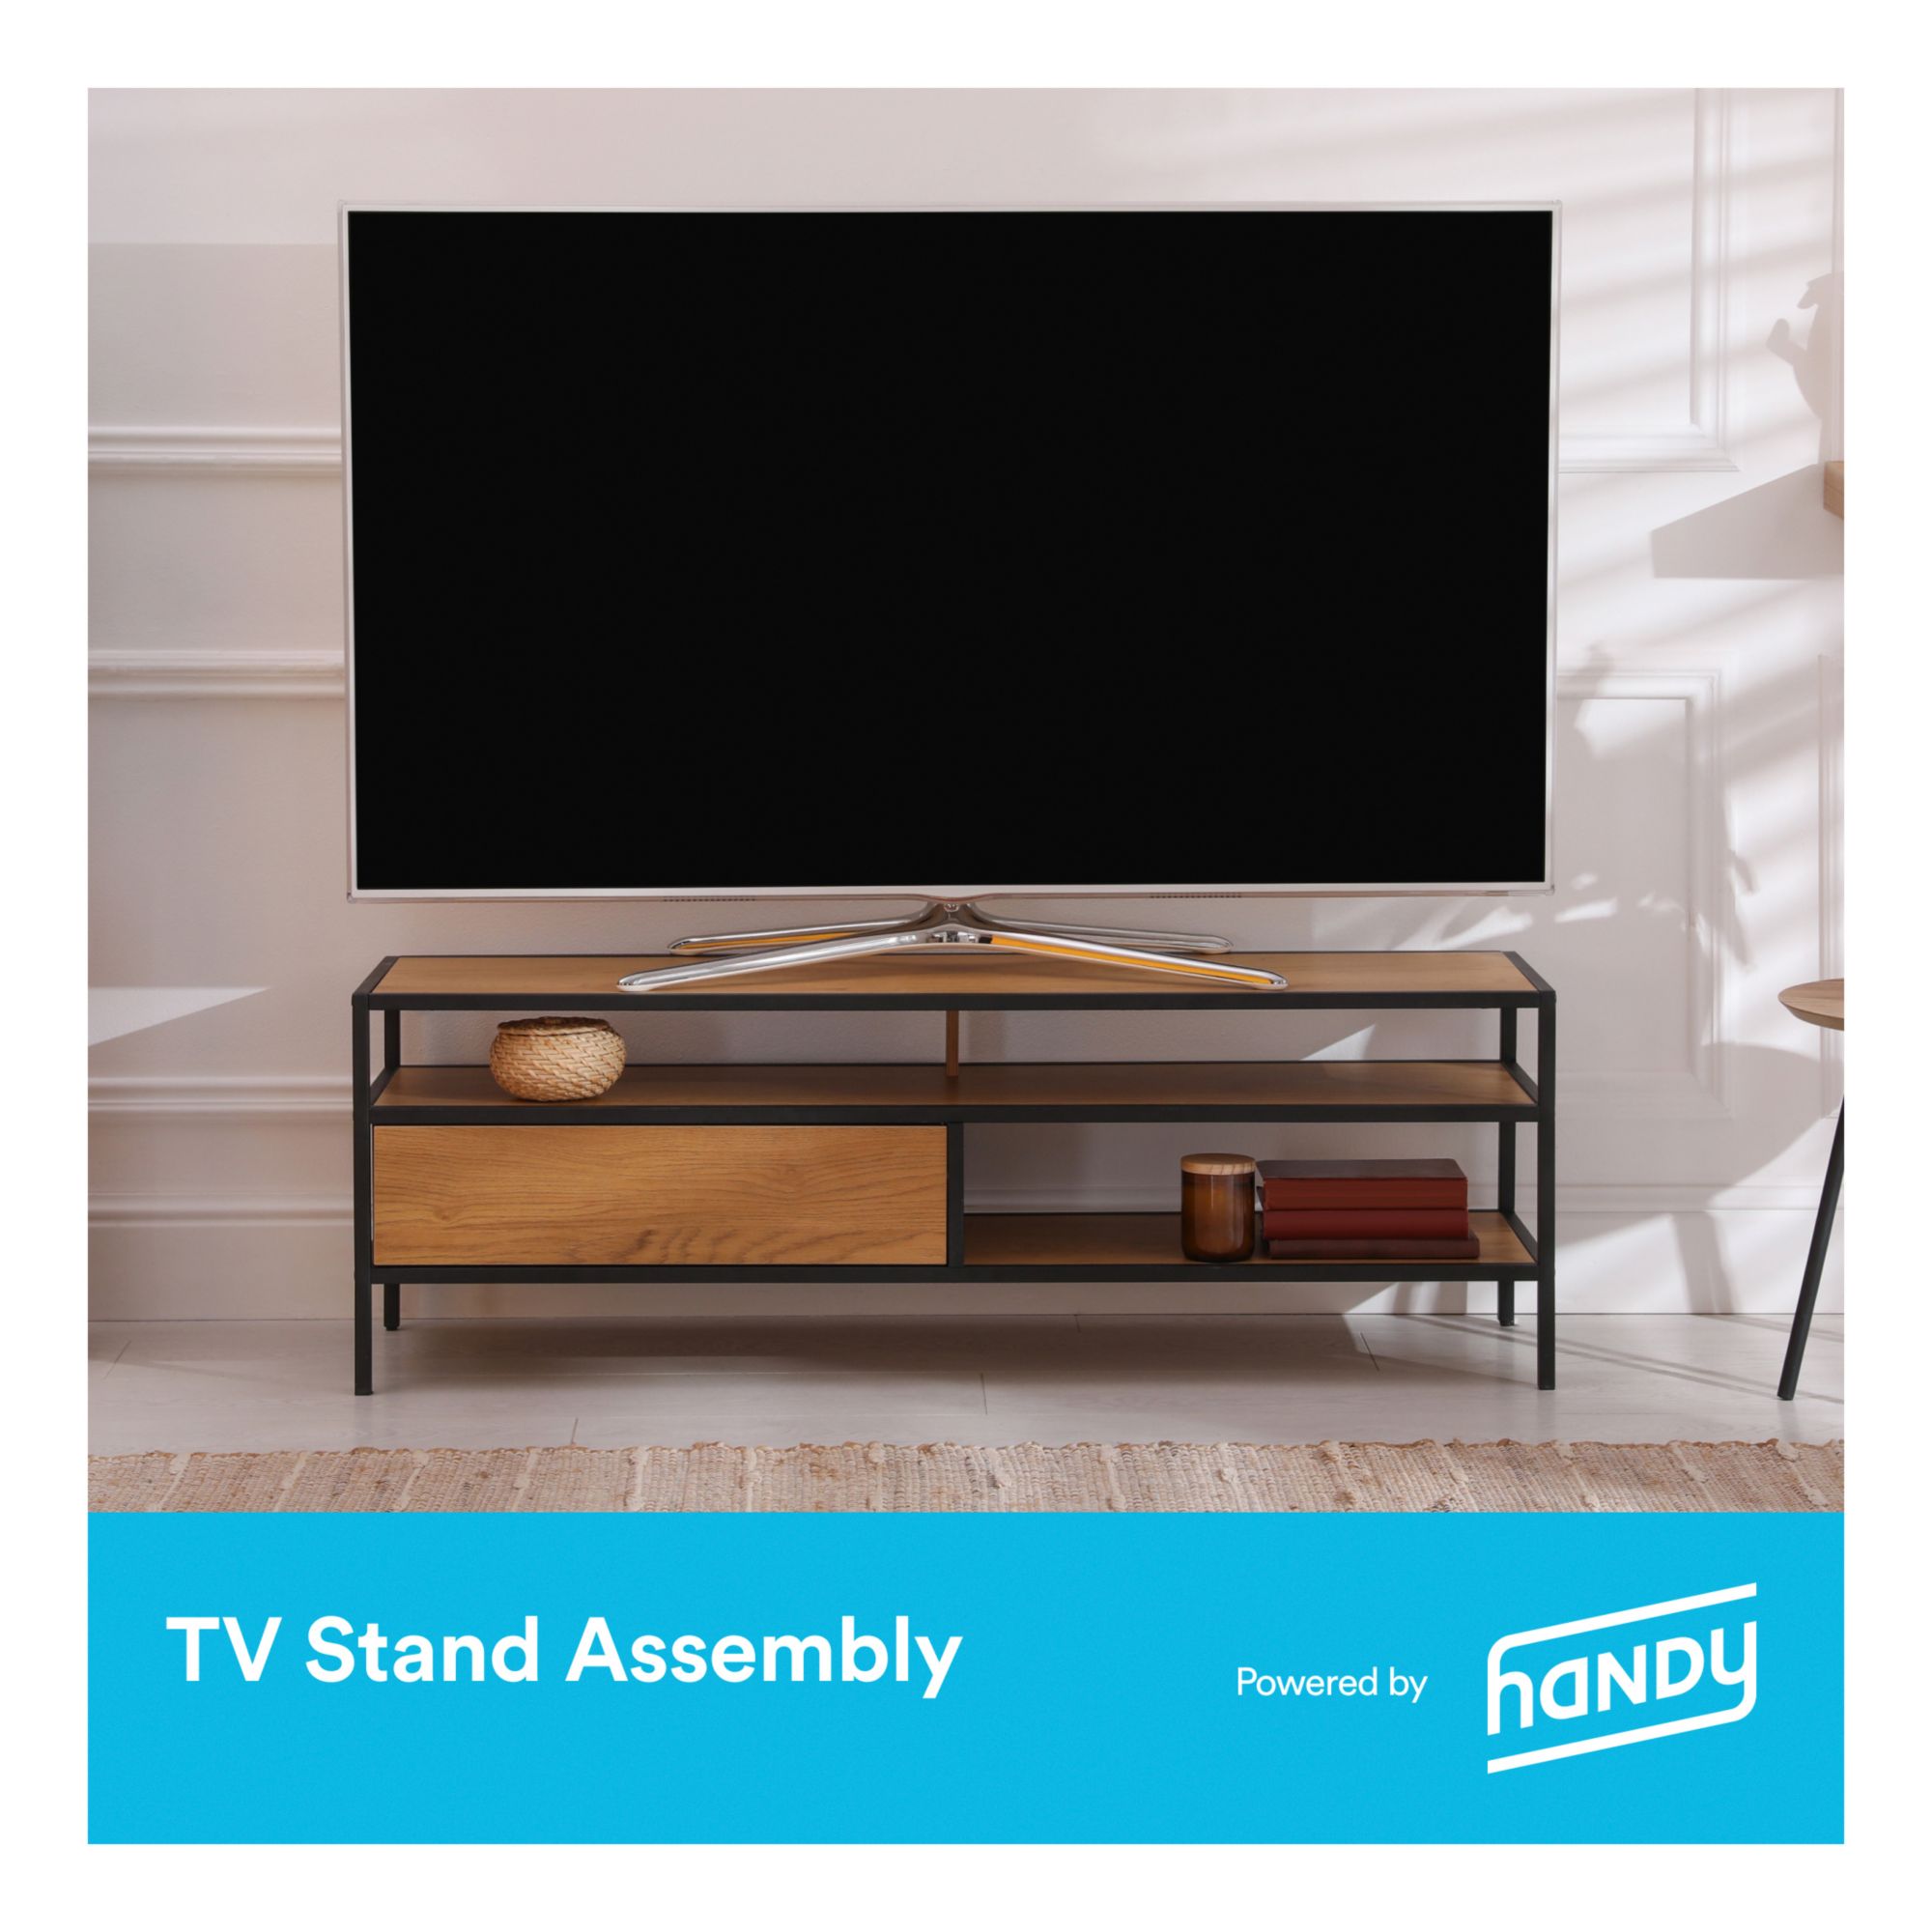 Handy TV Stand Assembly